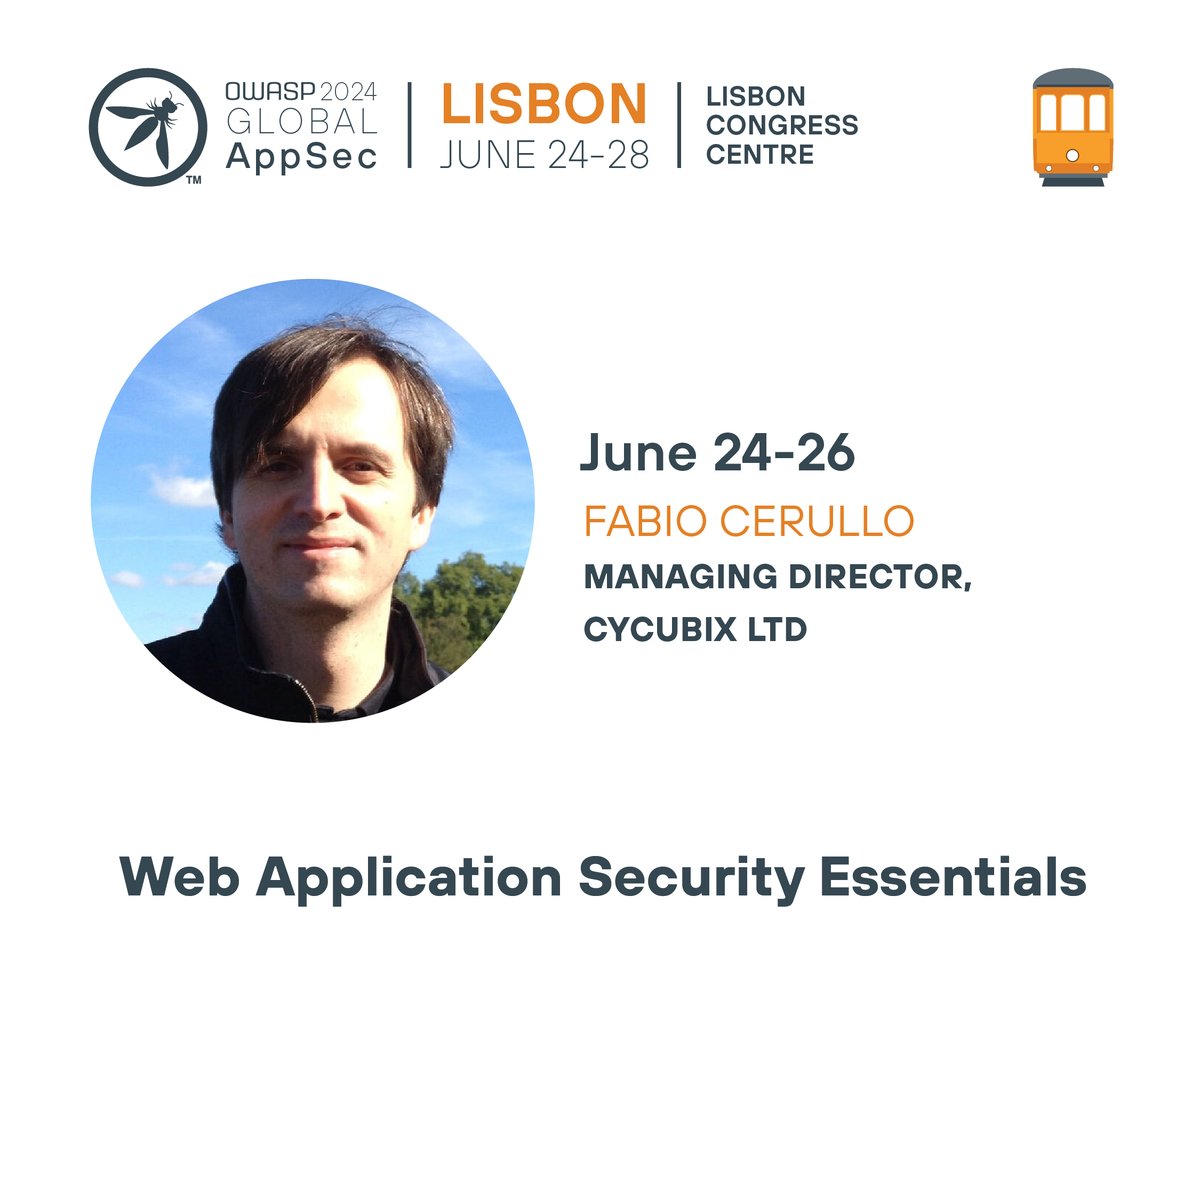 OWASP Global AppSec Lisbon, June 2024 Training sessions for #infosec professionals, led by industry leaders like @fcerullo of @CYCUBIX Reserve your spot! ⬇️ ecs.page.link/8R8JH #owasp #appsec #AI #cybersecurity #lisbon #portugal #networking #threatmodeling #training